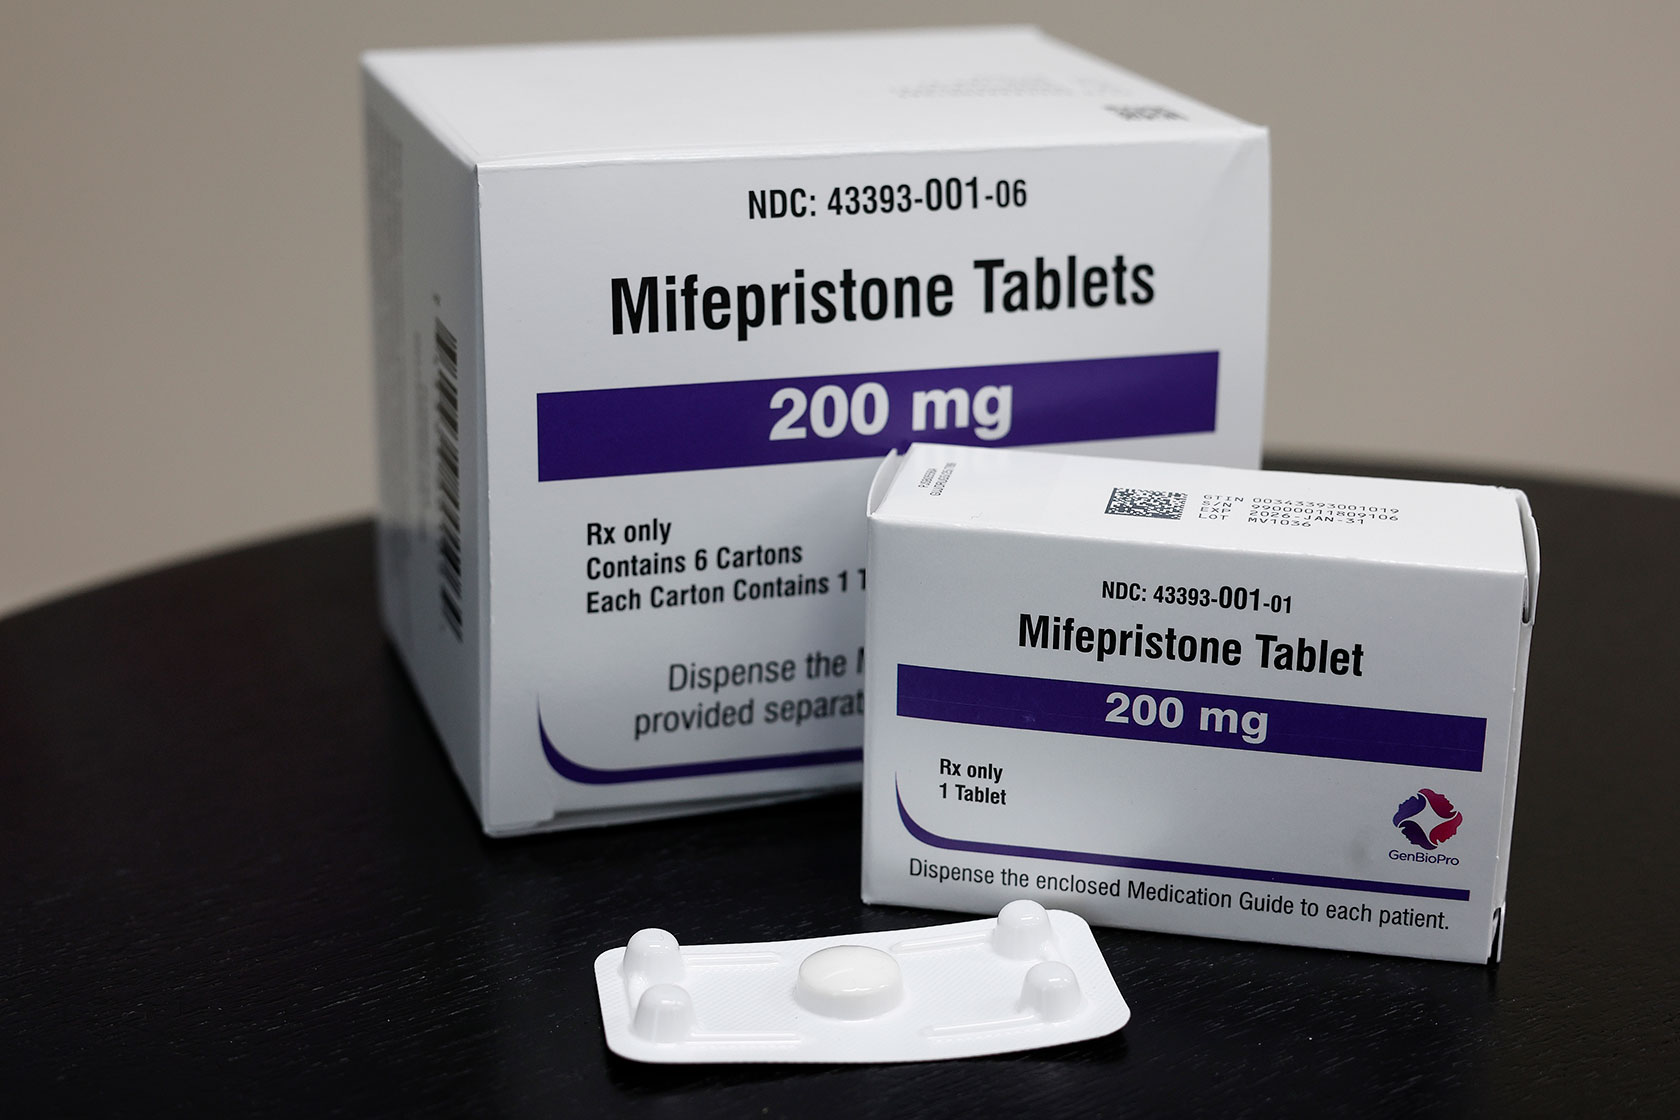 Photo shows two white boxes sitting on a black surface. Both boxes display information about the medication they contain, mifepristone.